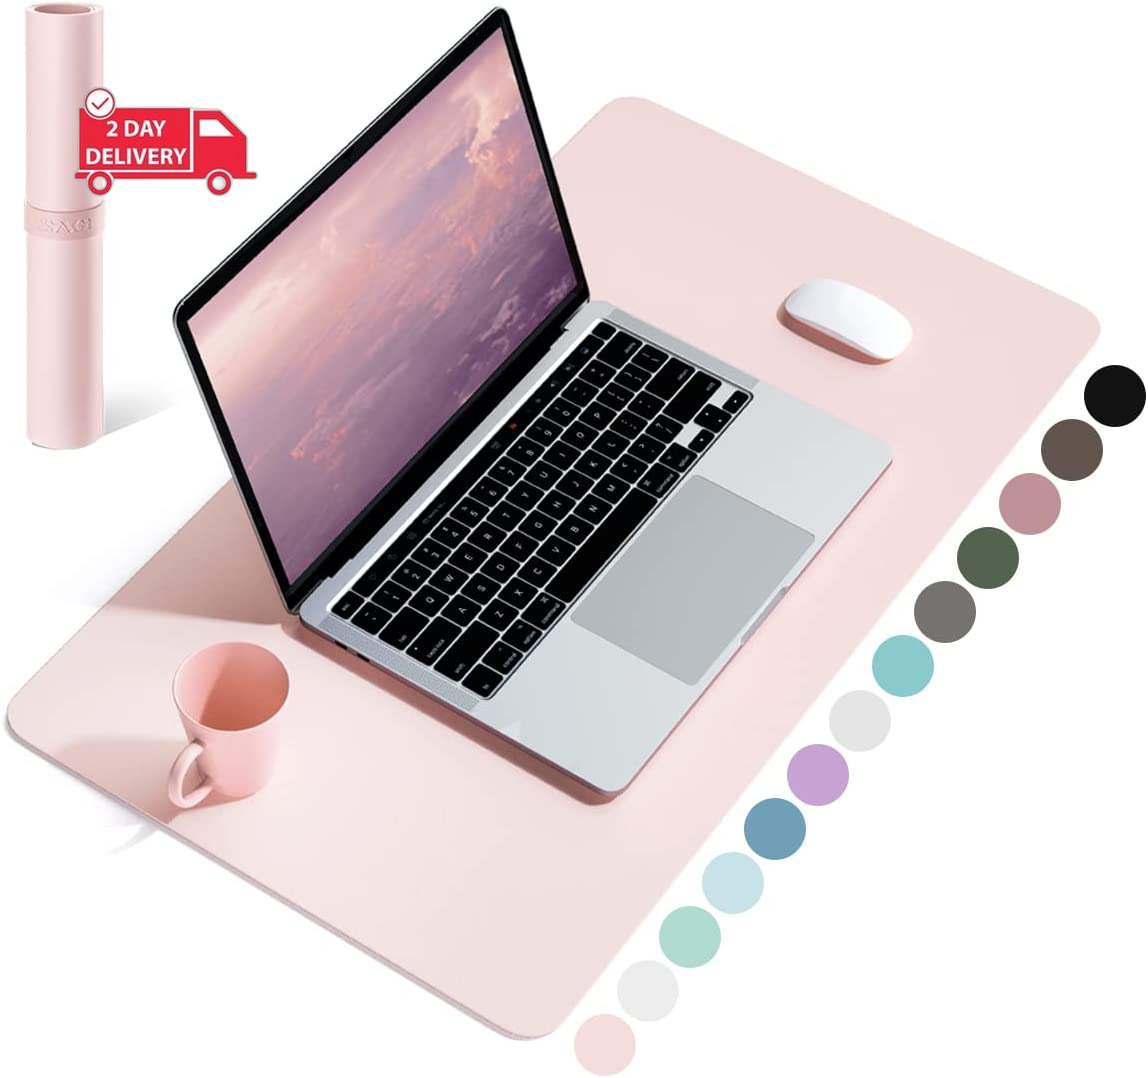 Non-Slip Desk Pad,Mouse Pad,Waterproof PVC Leather Desk Table Protector,Ultra Th